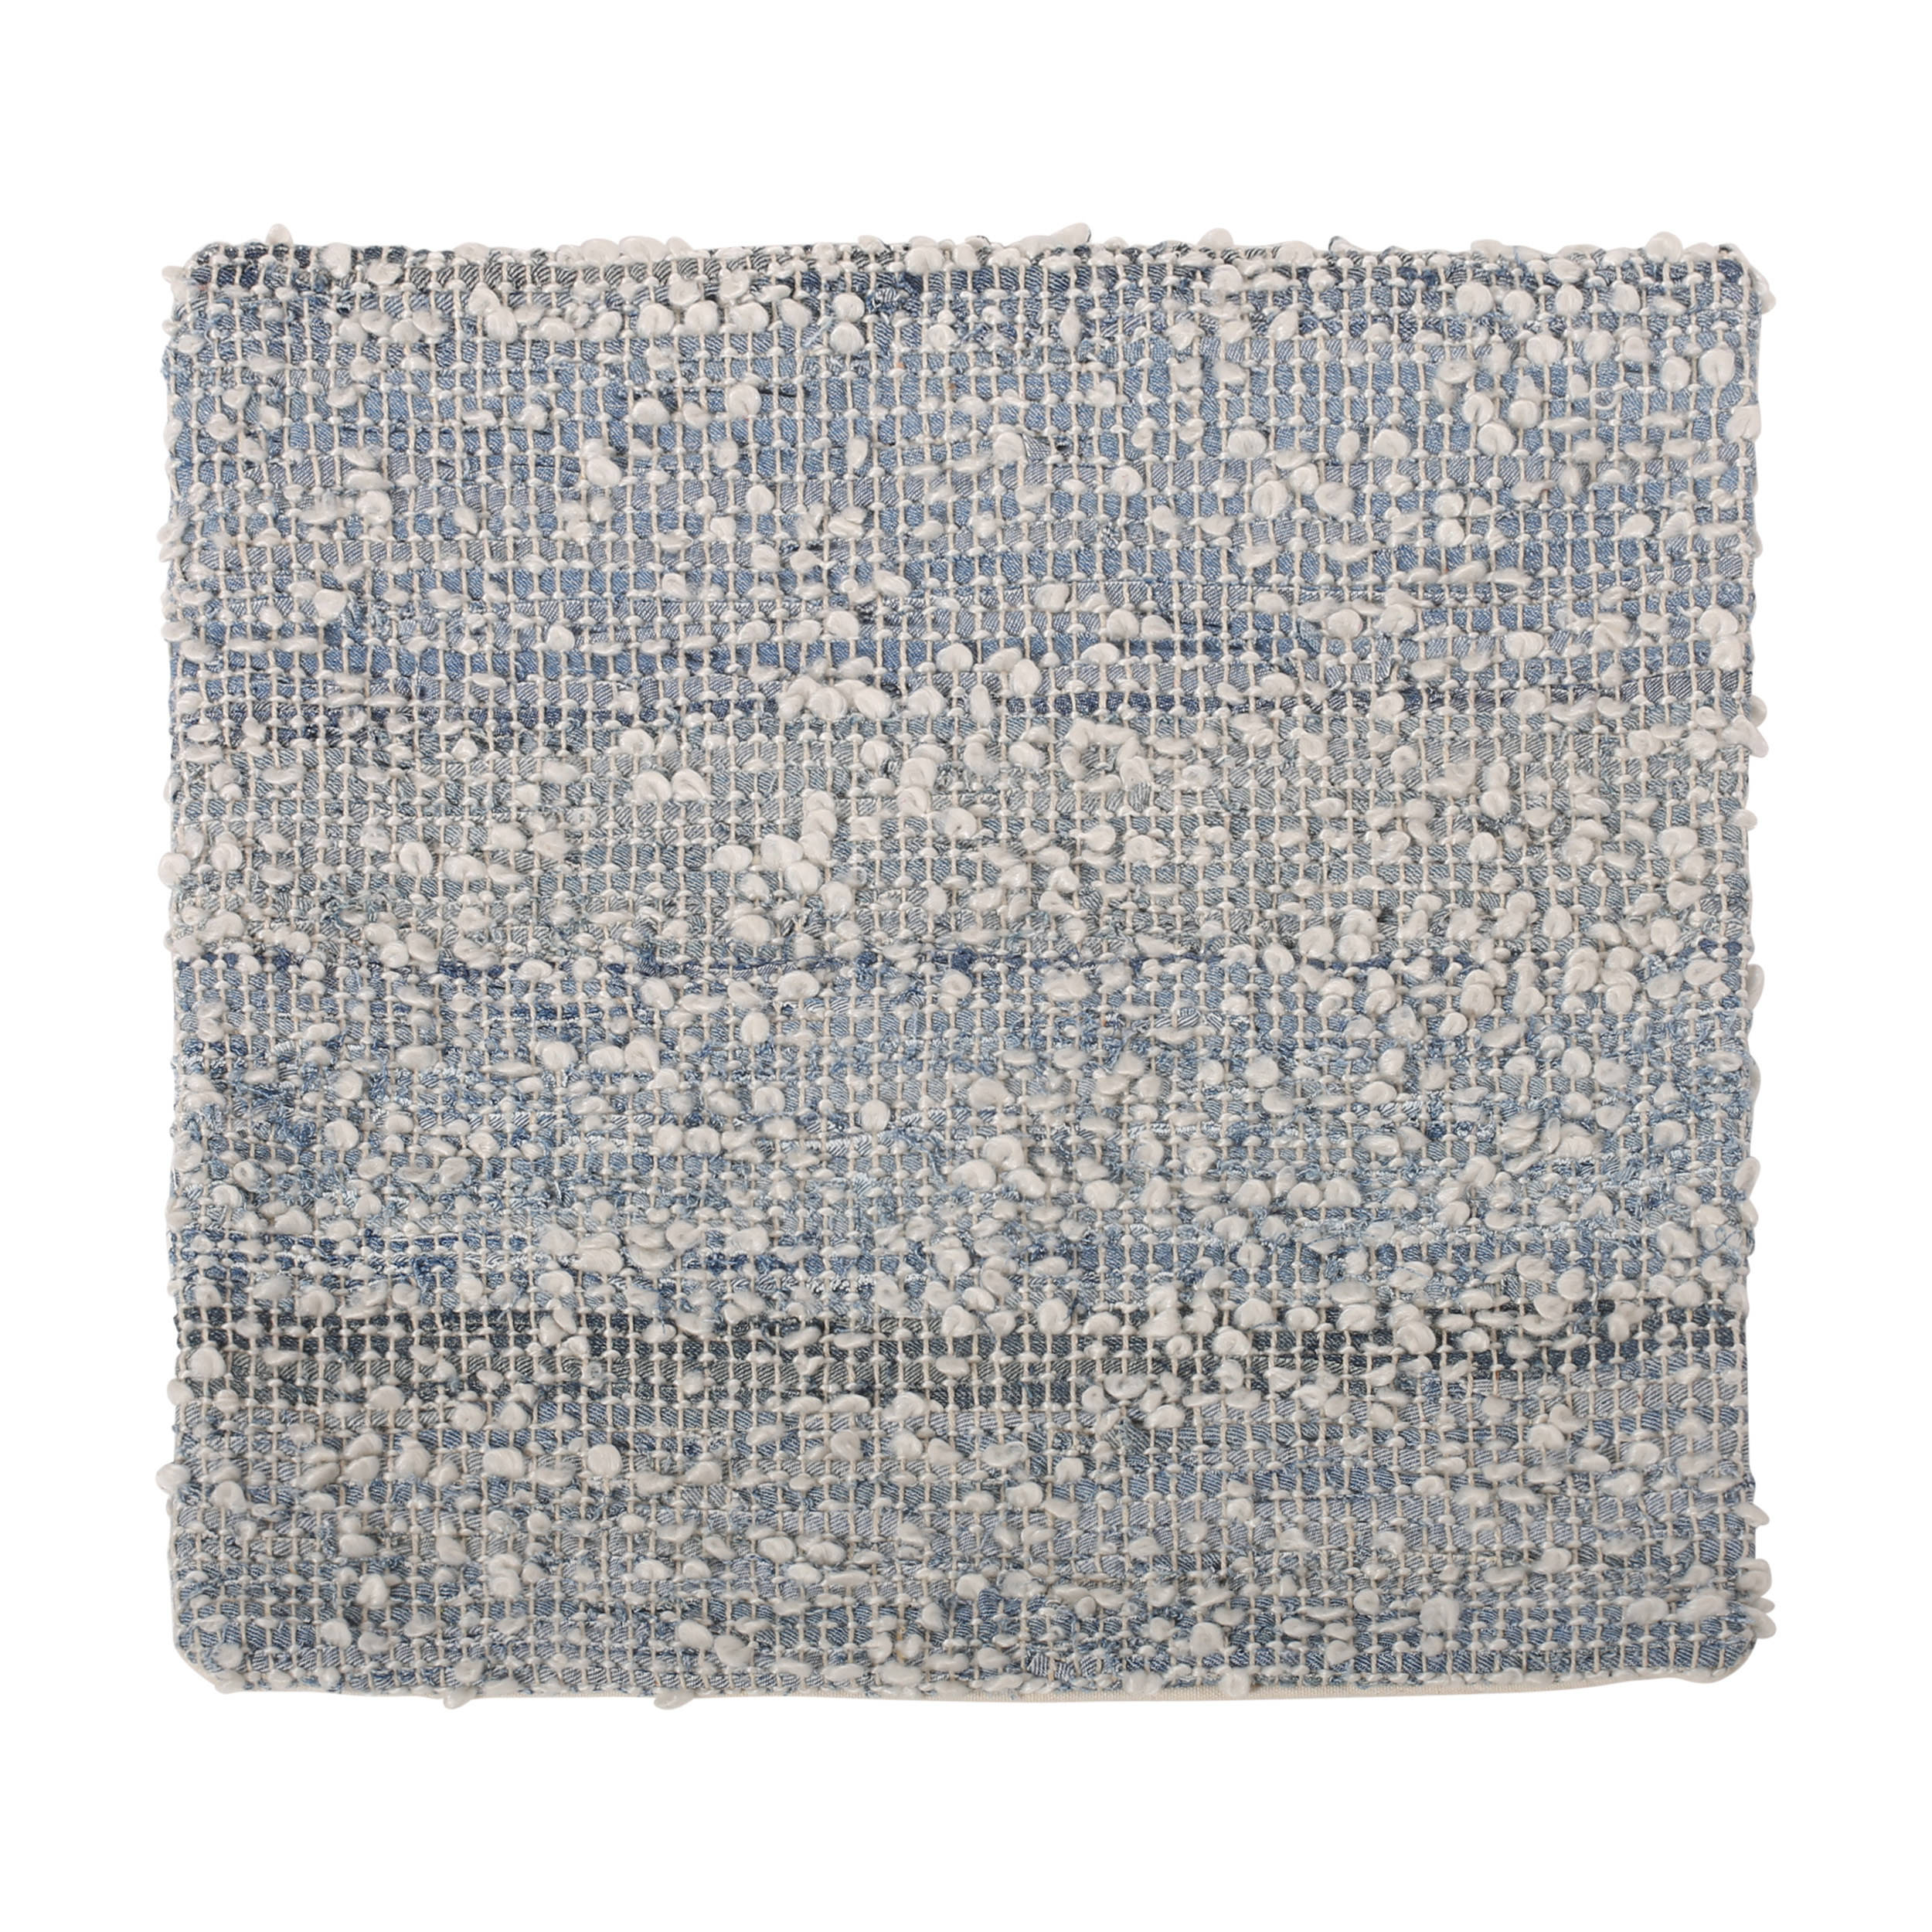 The pillow cover that covers 18-inch square pillows with a textured mix of denim, polyester, and cotton